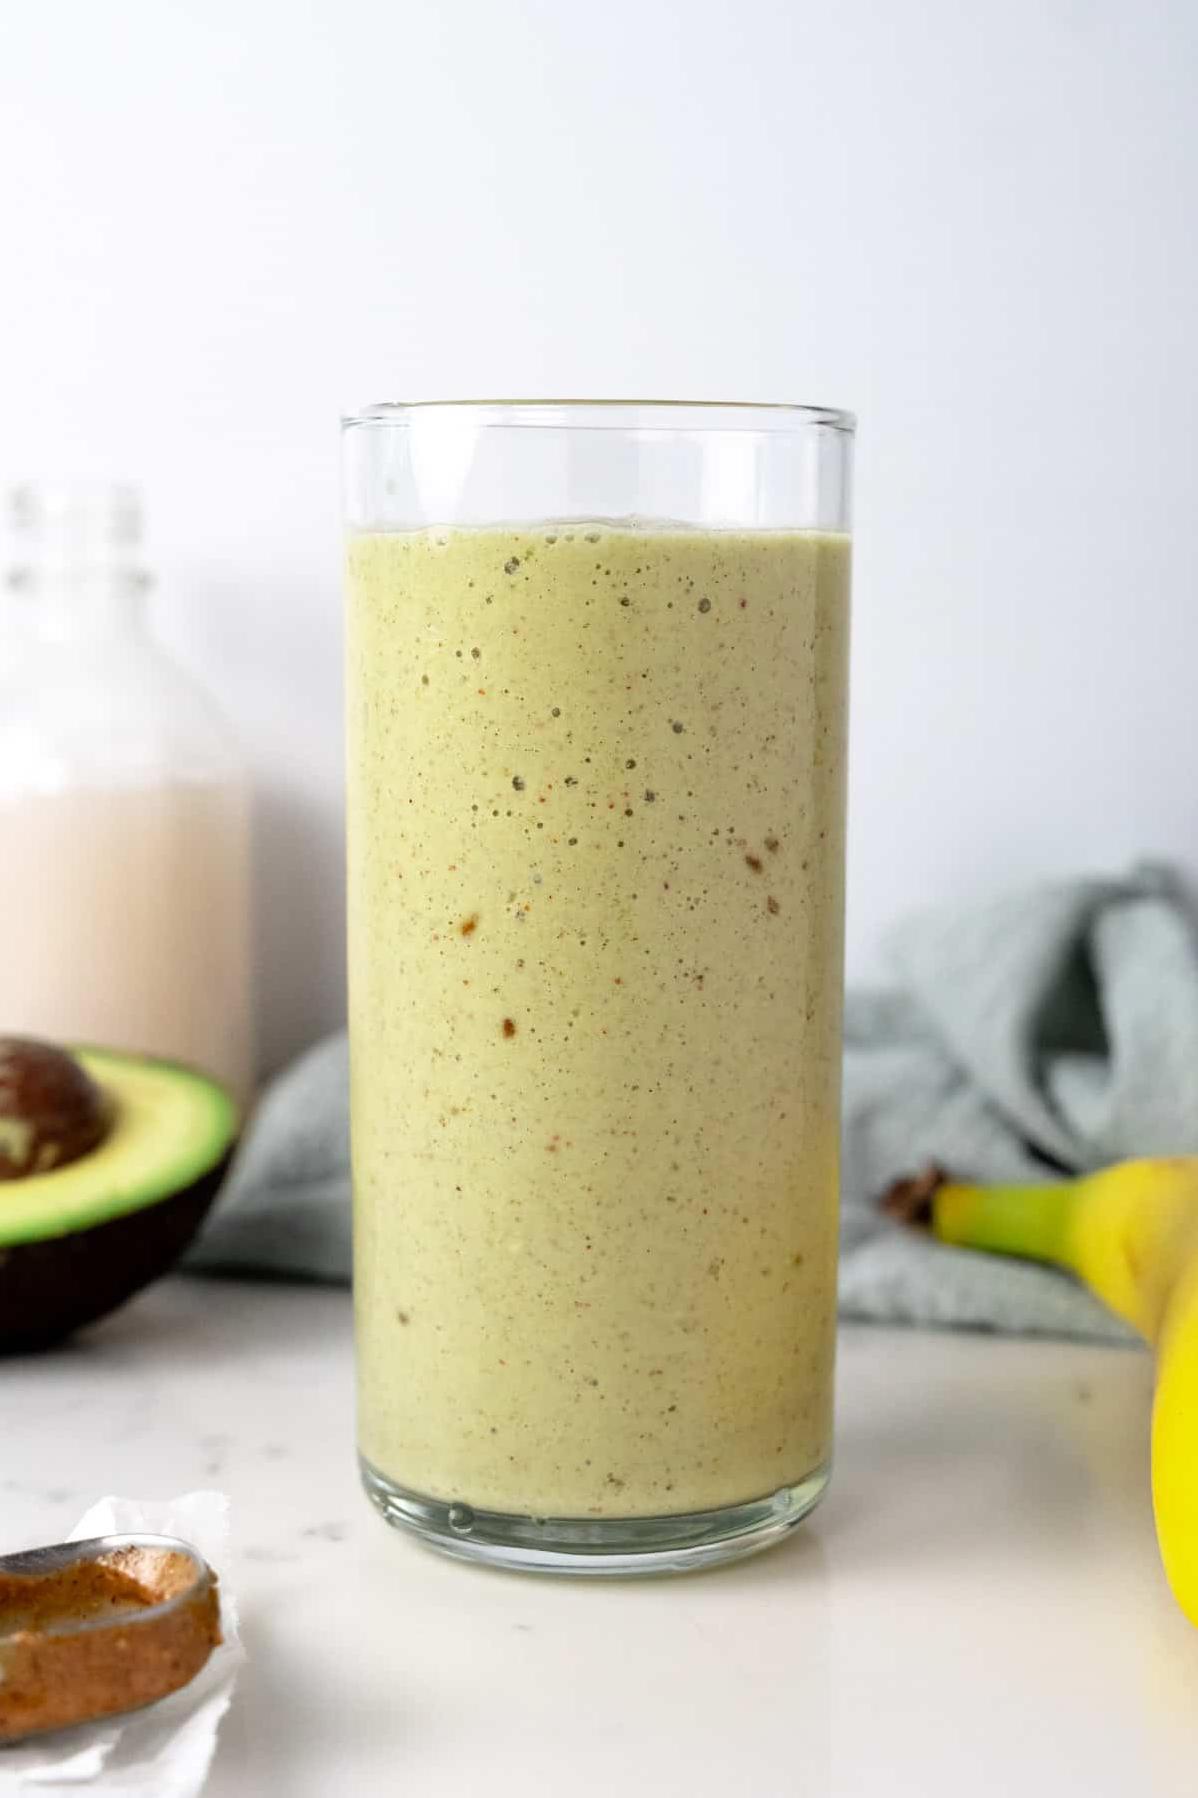  Sip your way to better health with this dairy-free delight.